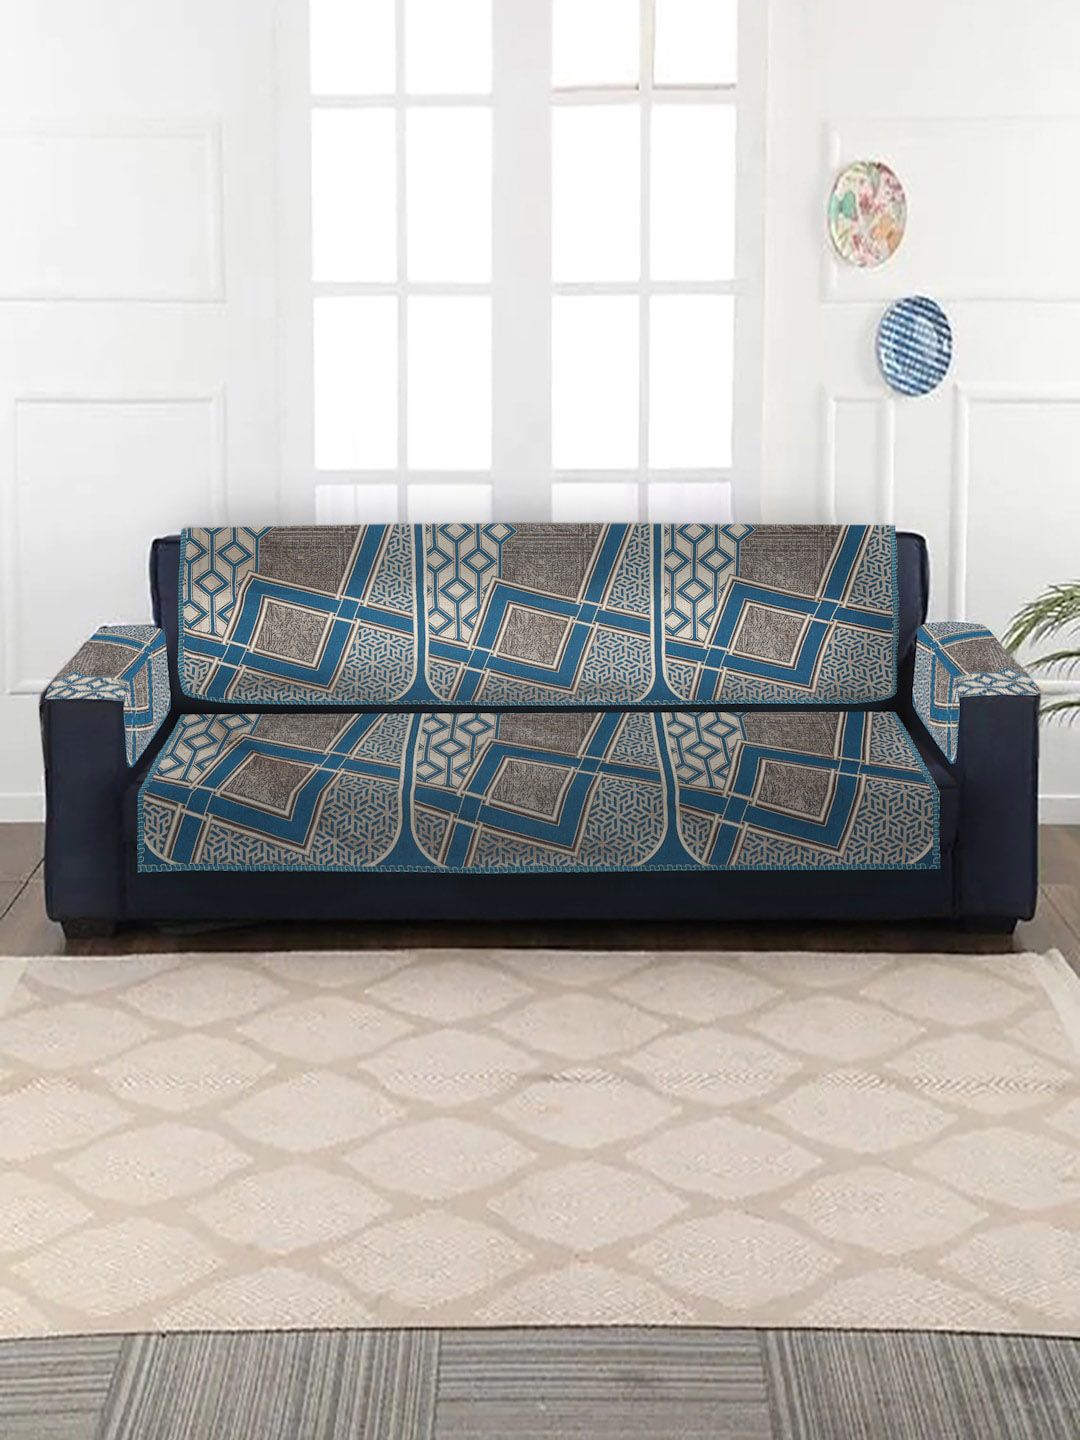 MULTITEX Set of 16 Blue Jacquard 5 Seater Sofa Covers with Arm Covers Price in India